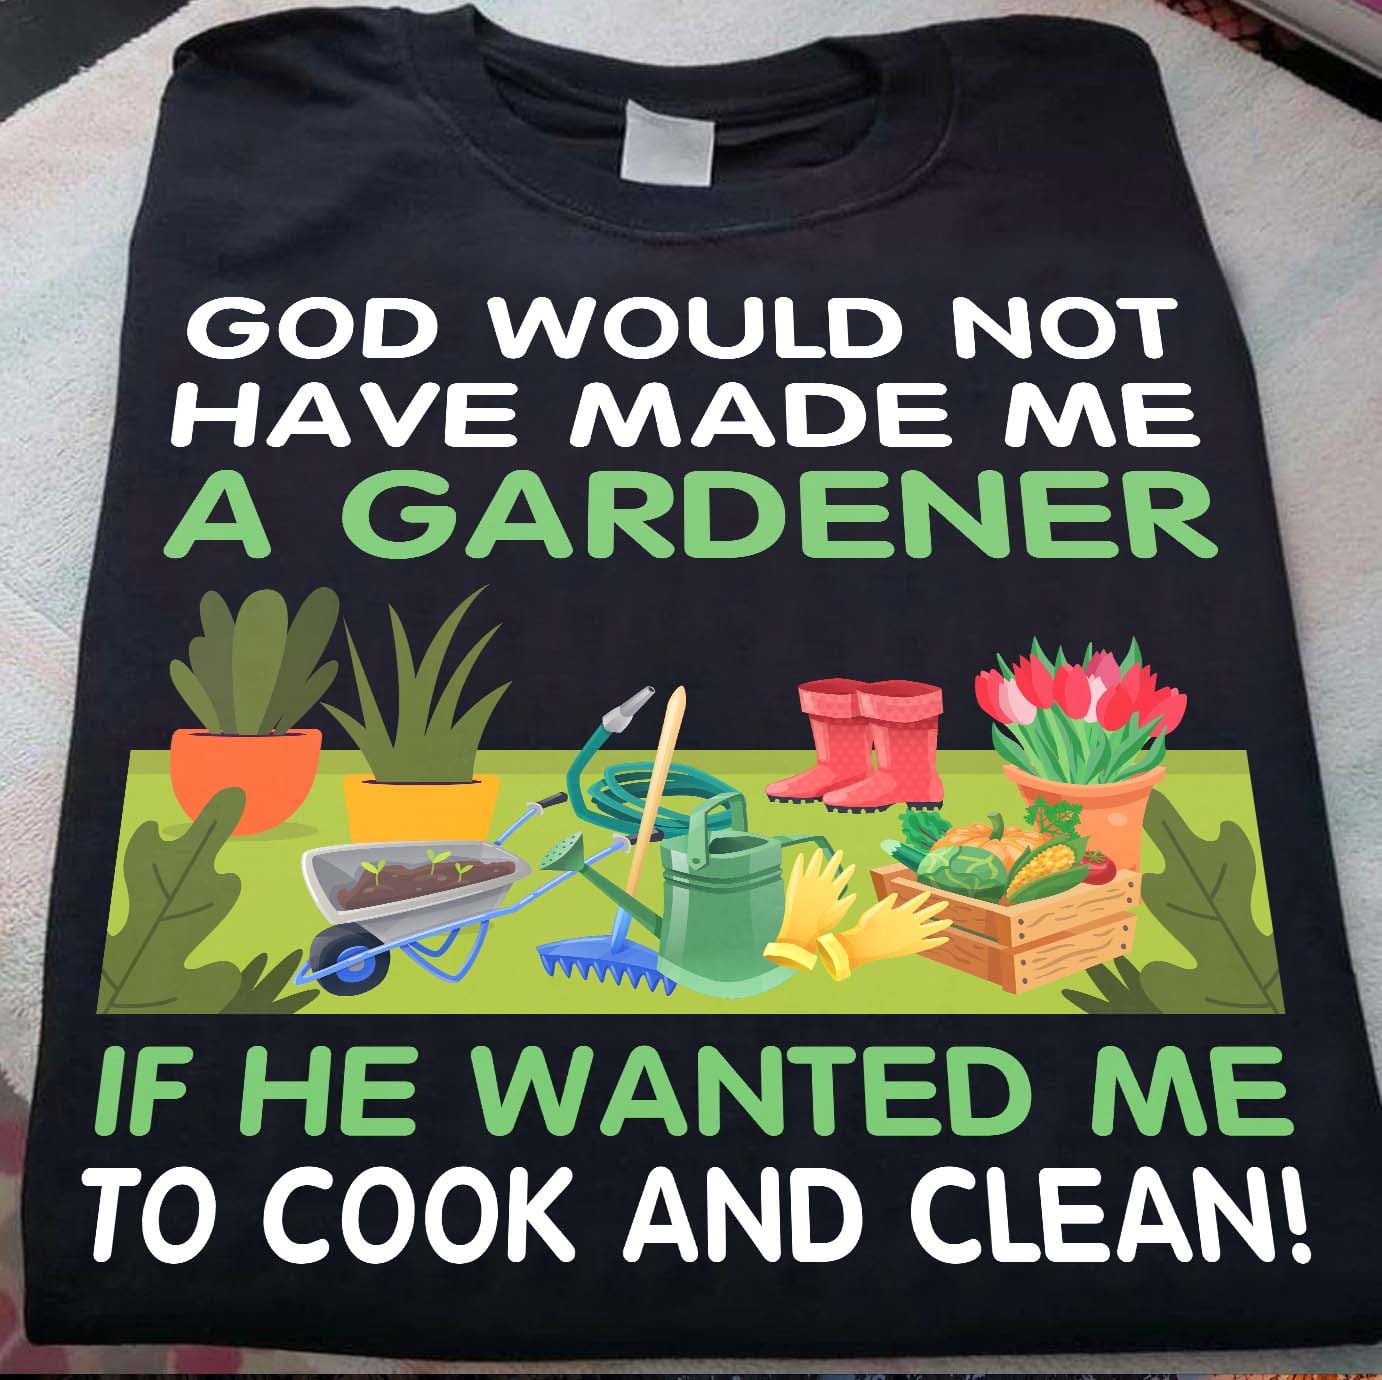 God would not have made me a gardener if he wanted me to cook and clean